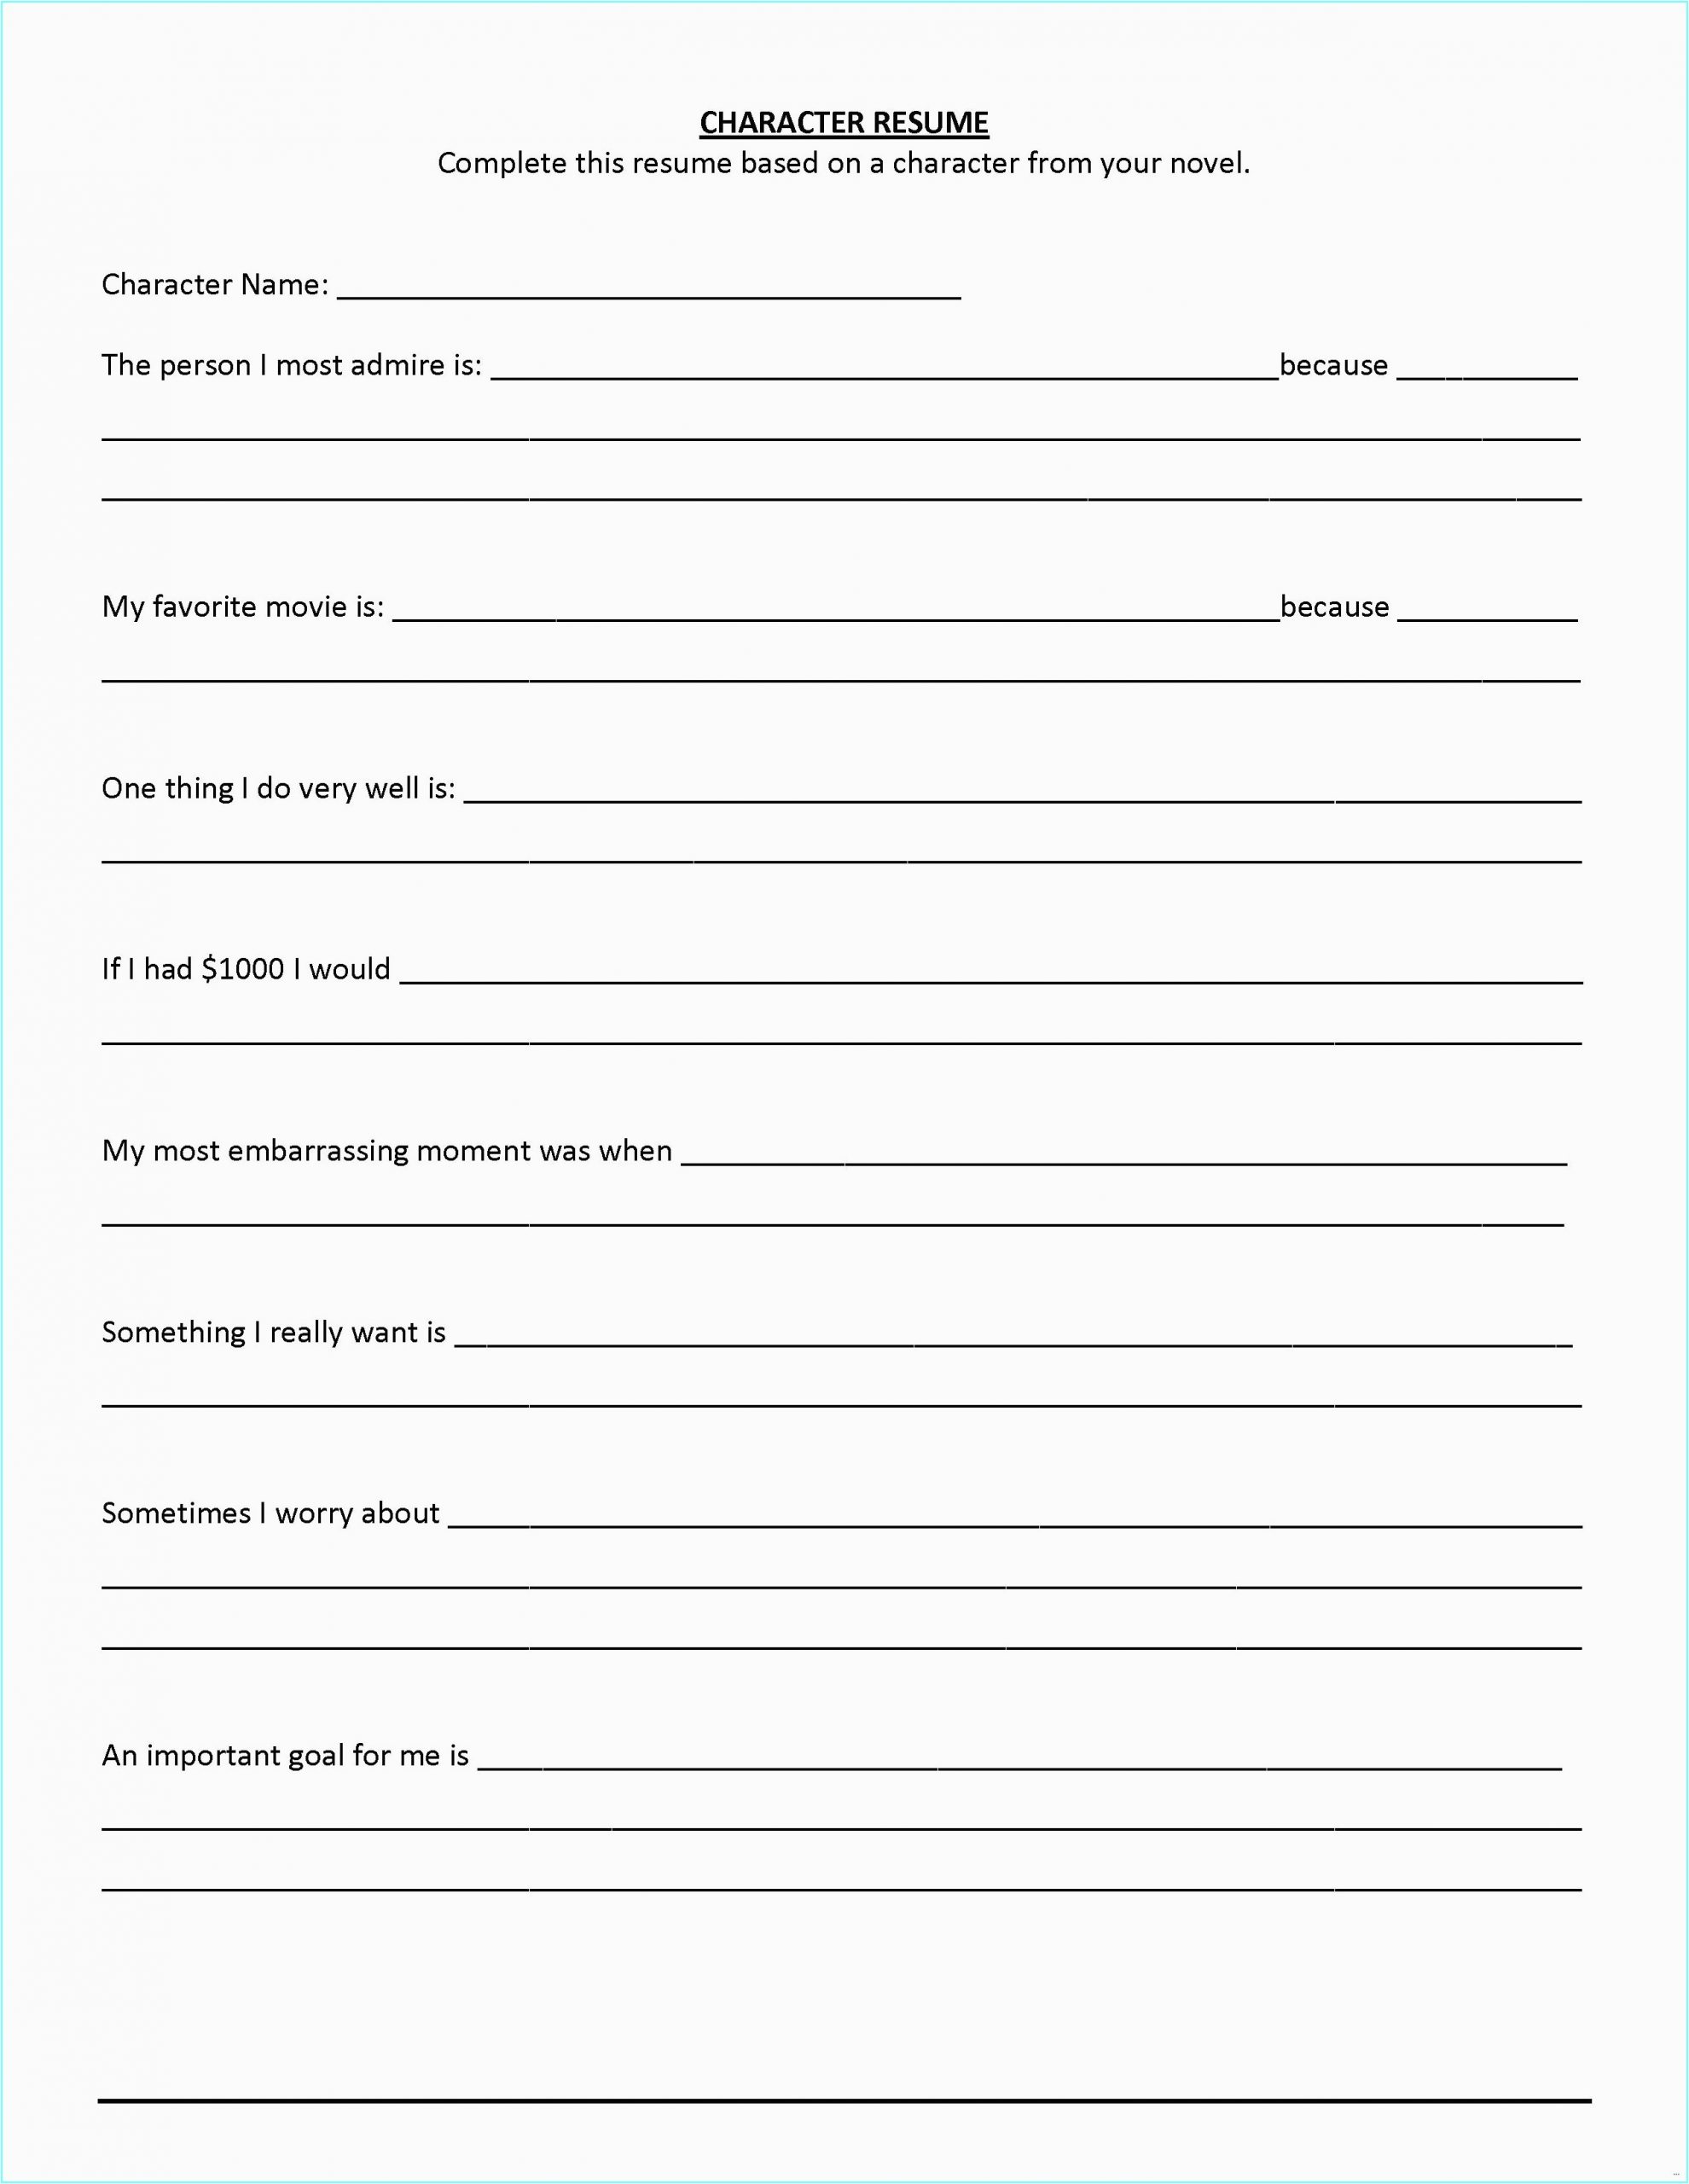 Resume Fill In the Blank Template Free Printable Fill In the Blank Resume Templates